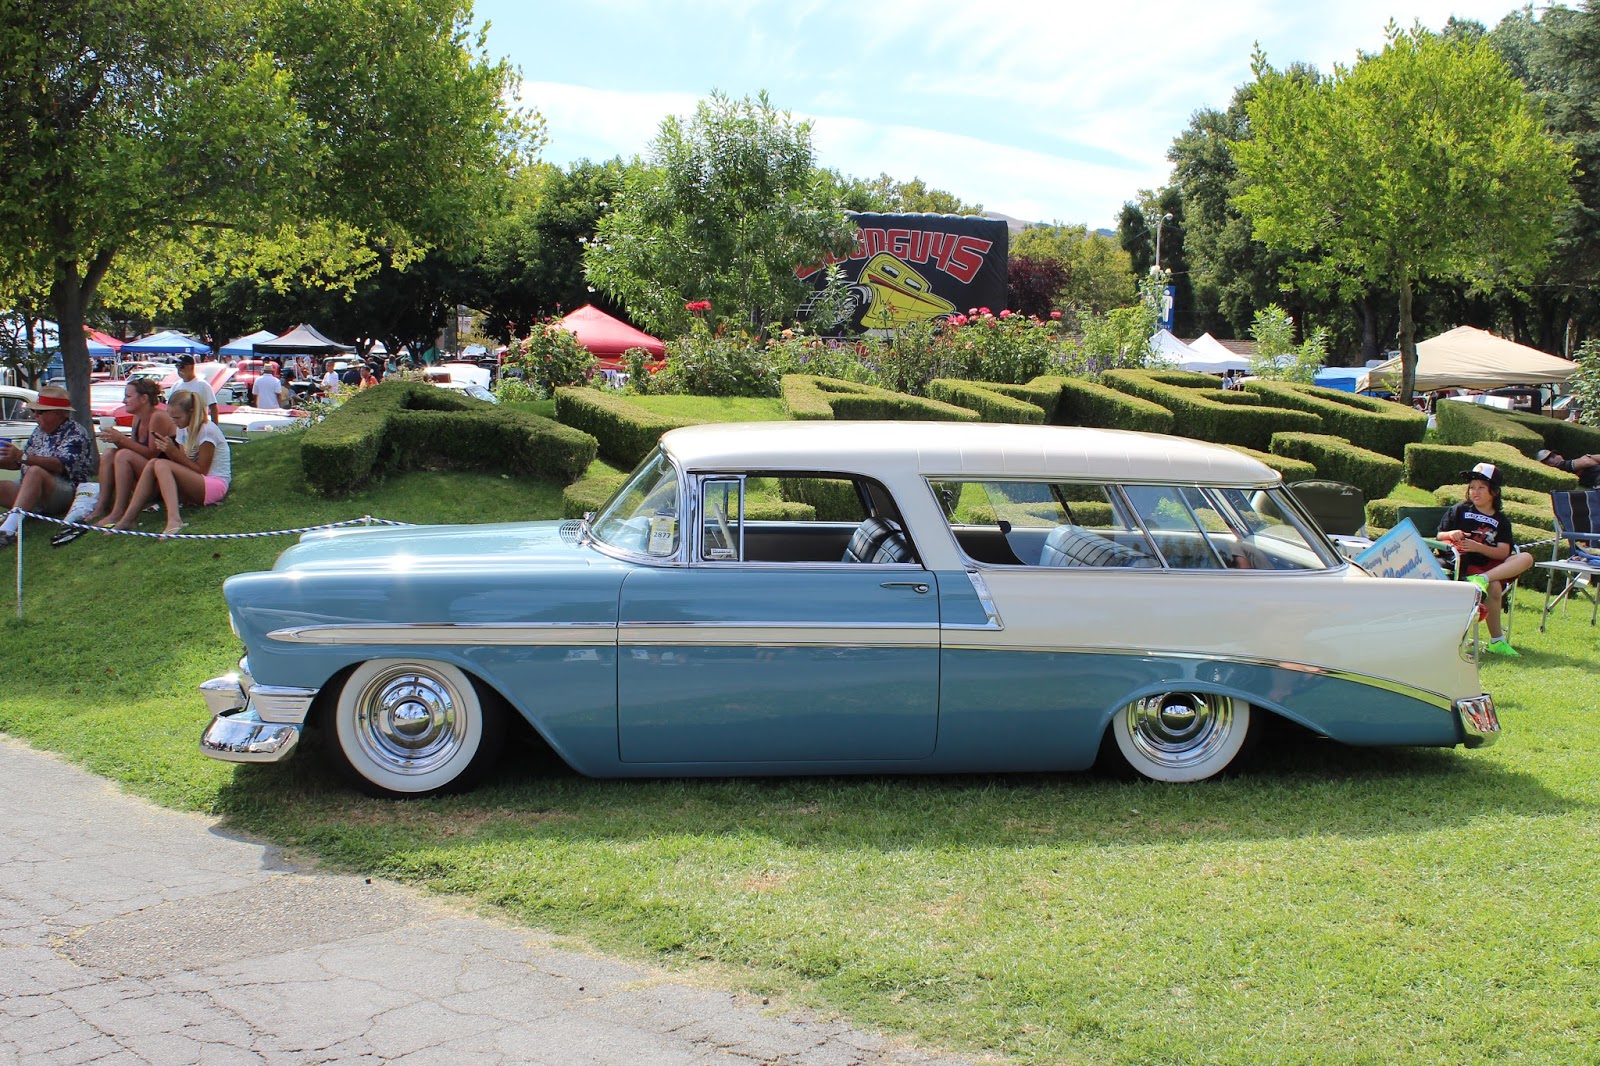 Covering Classic Cars Hot Rods And Muscle Cars At Goodguys focus for Classic Cars Pleasanton